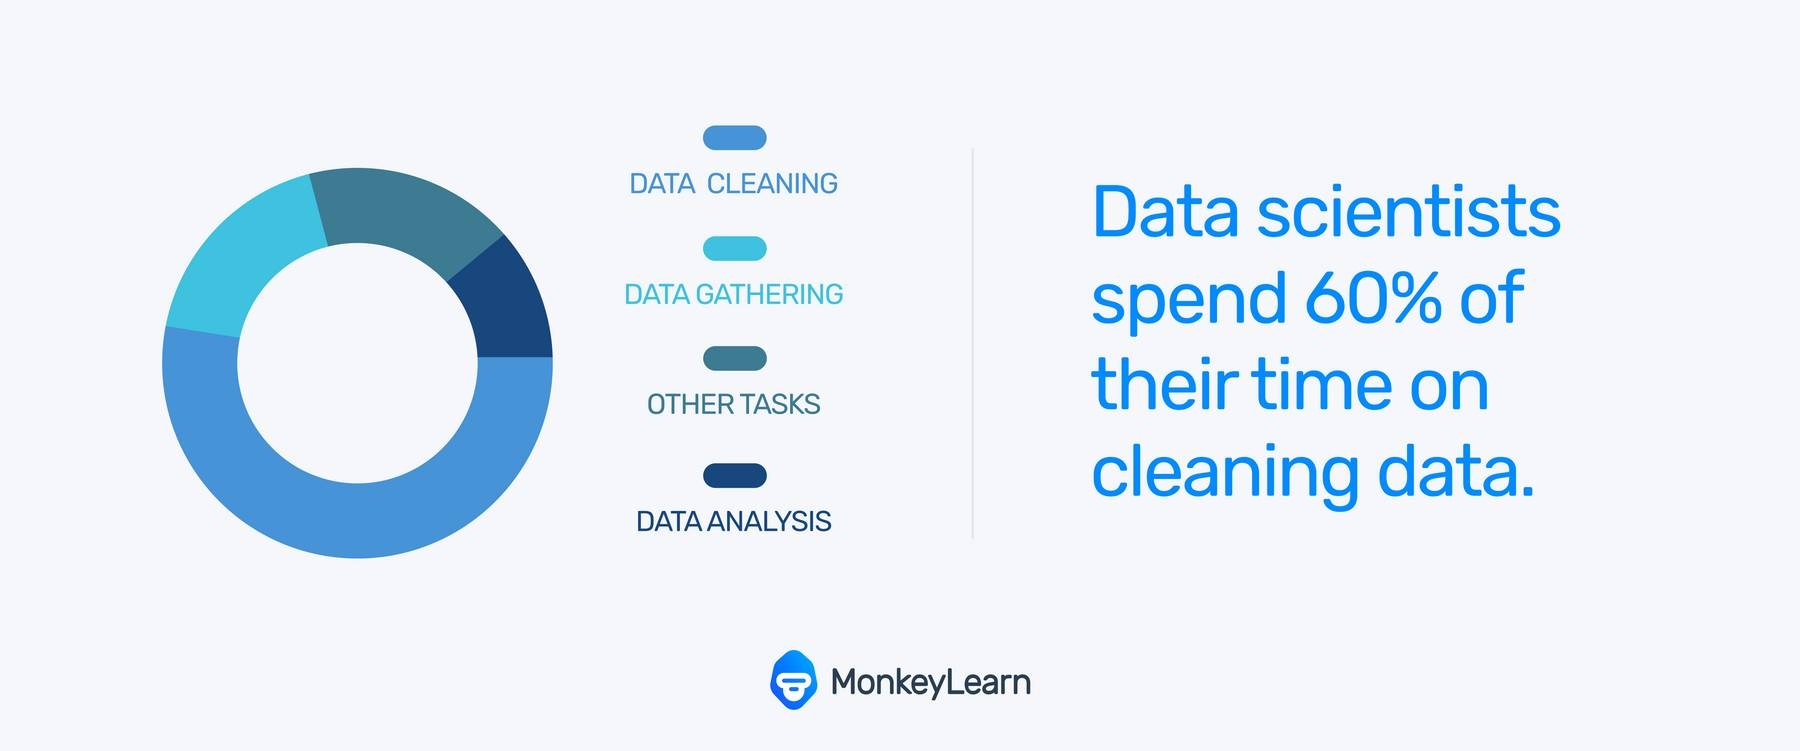 Data scientists spend 60% of their time cleaning data.